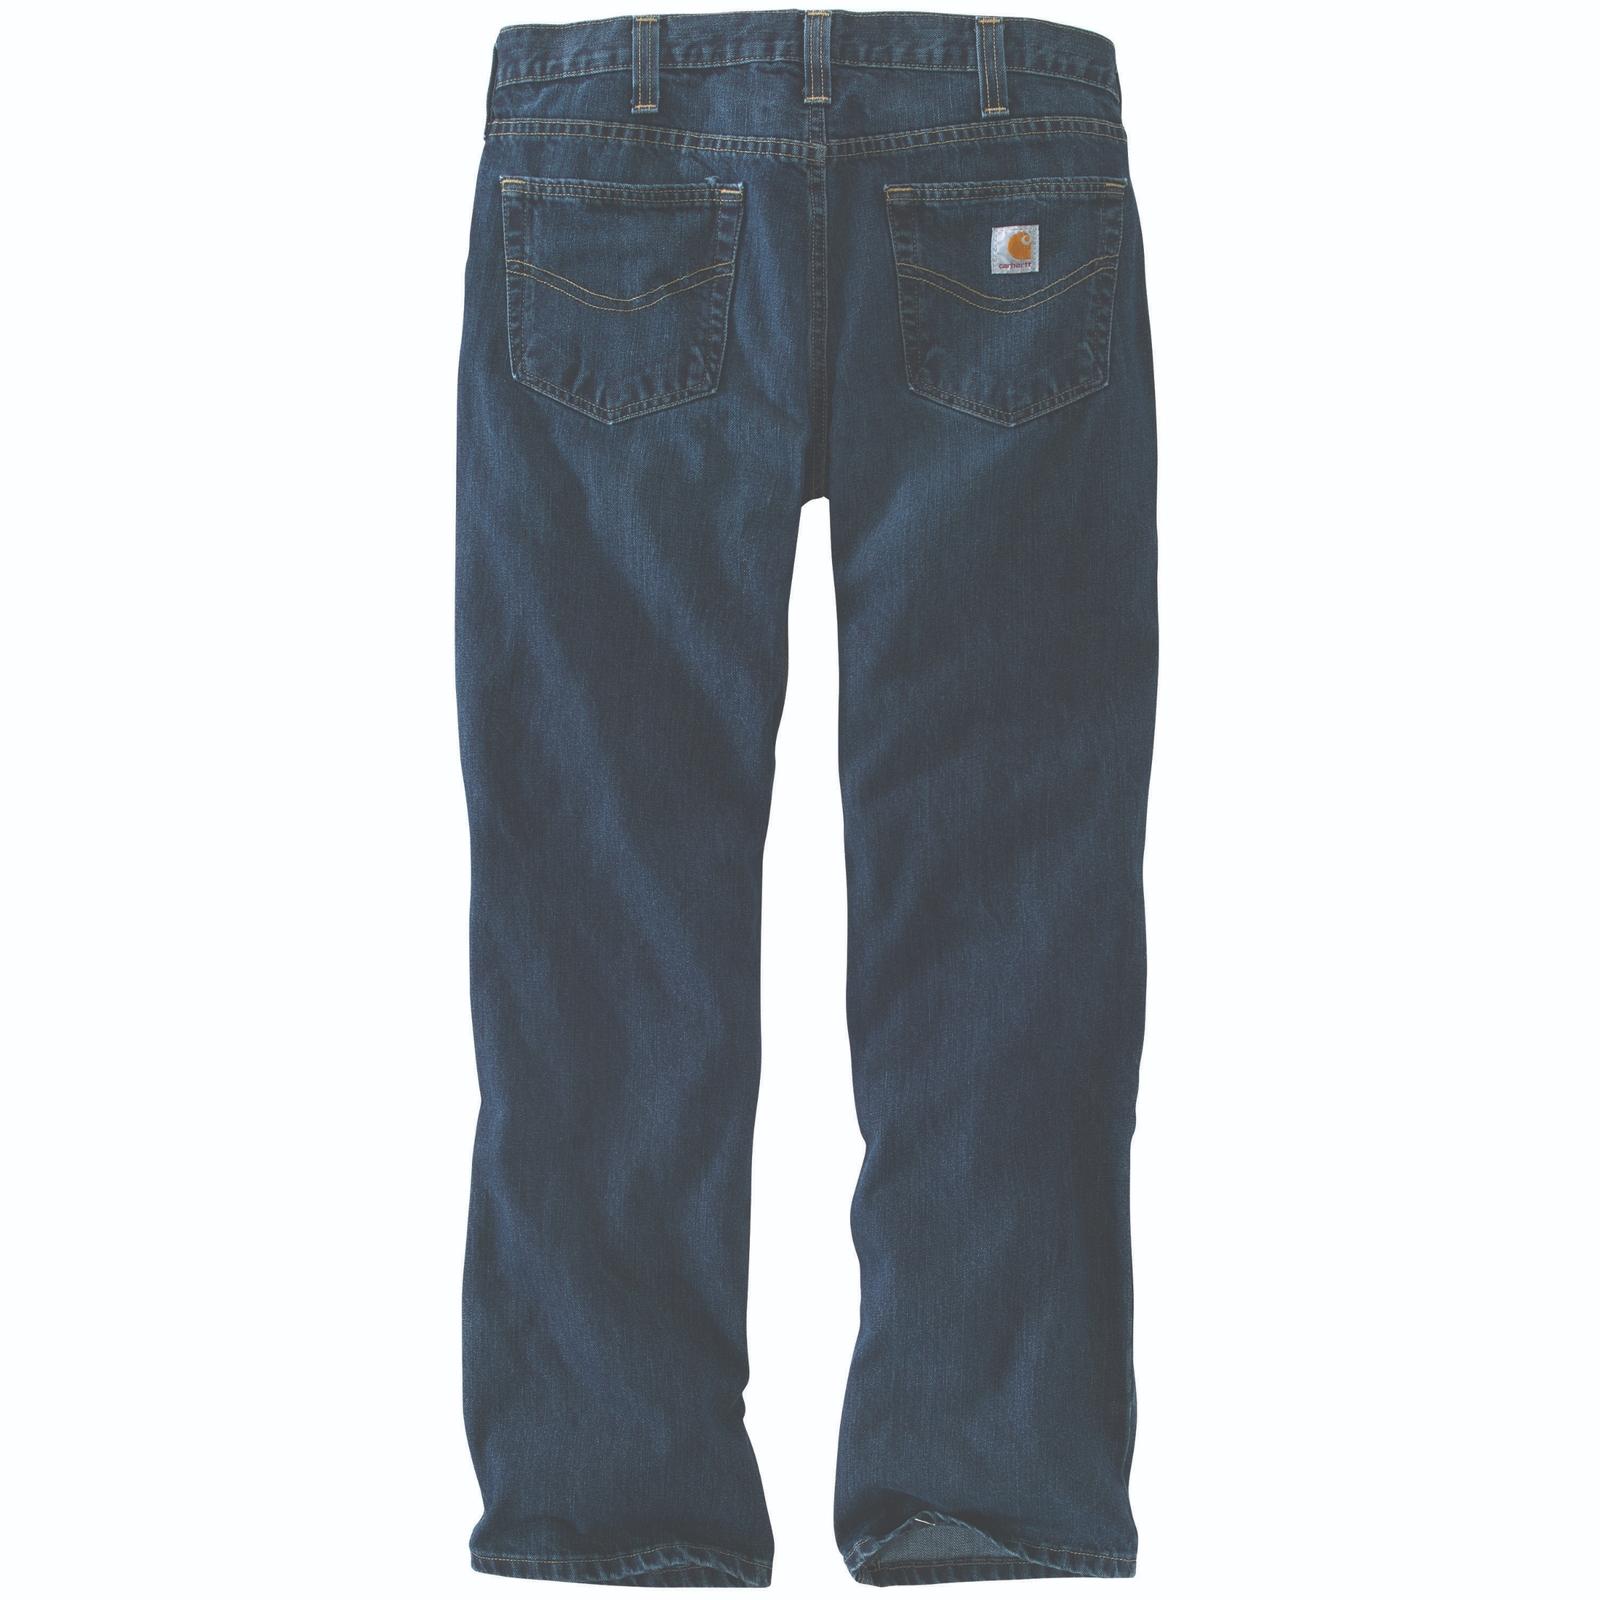 Carhartt Men's Relaxed Fit 5 Pocket Jeans in Frontier wash back view